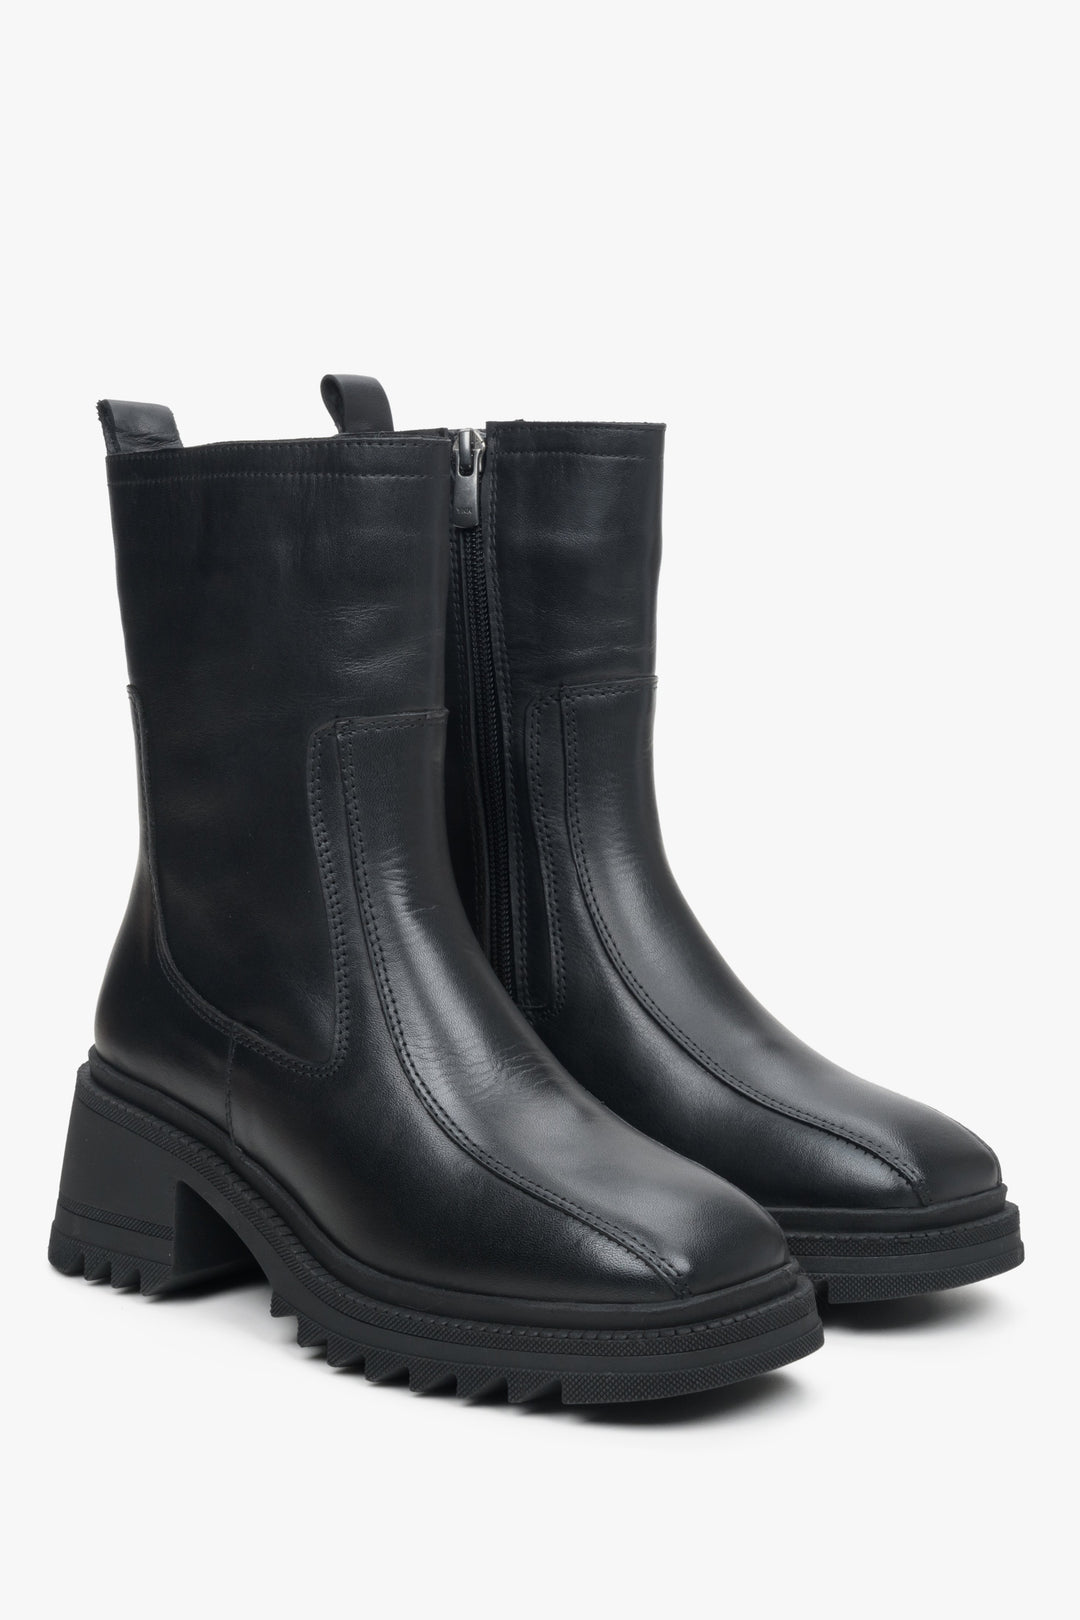 Women's black leather boots by Estro - close-up on the side line of the boots.